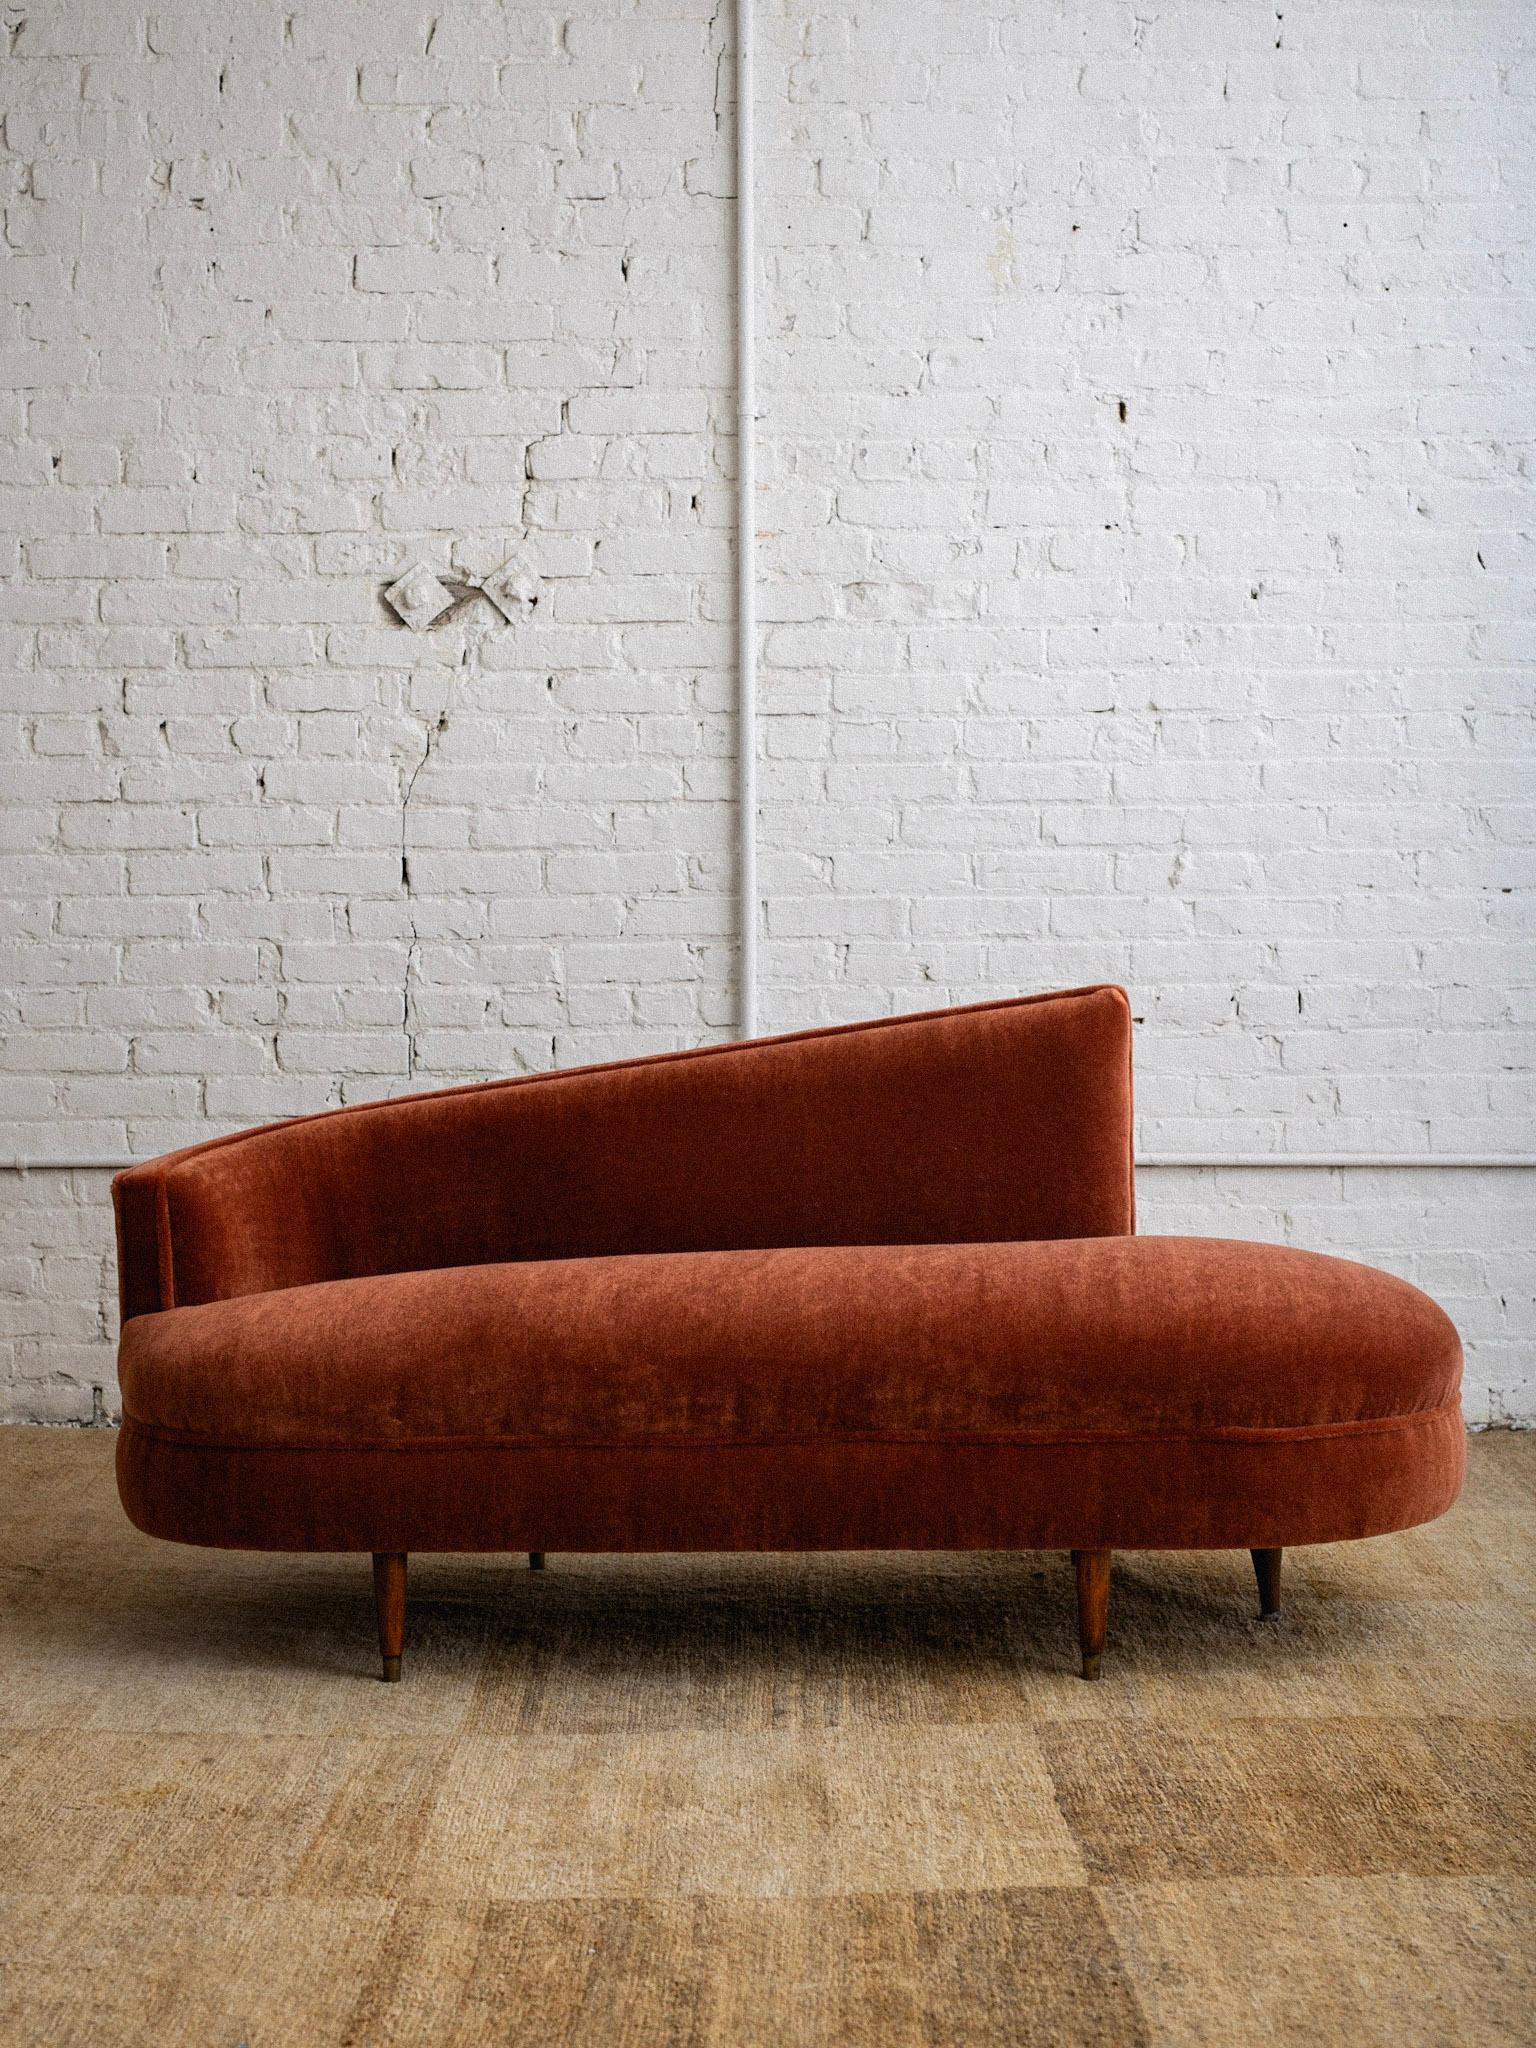 rust chaise lounge